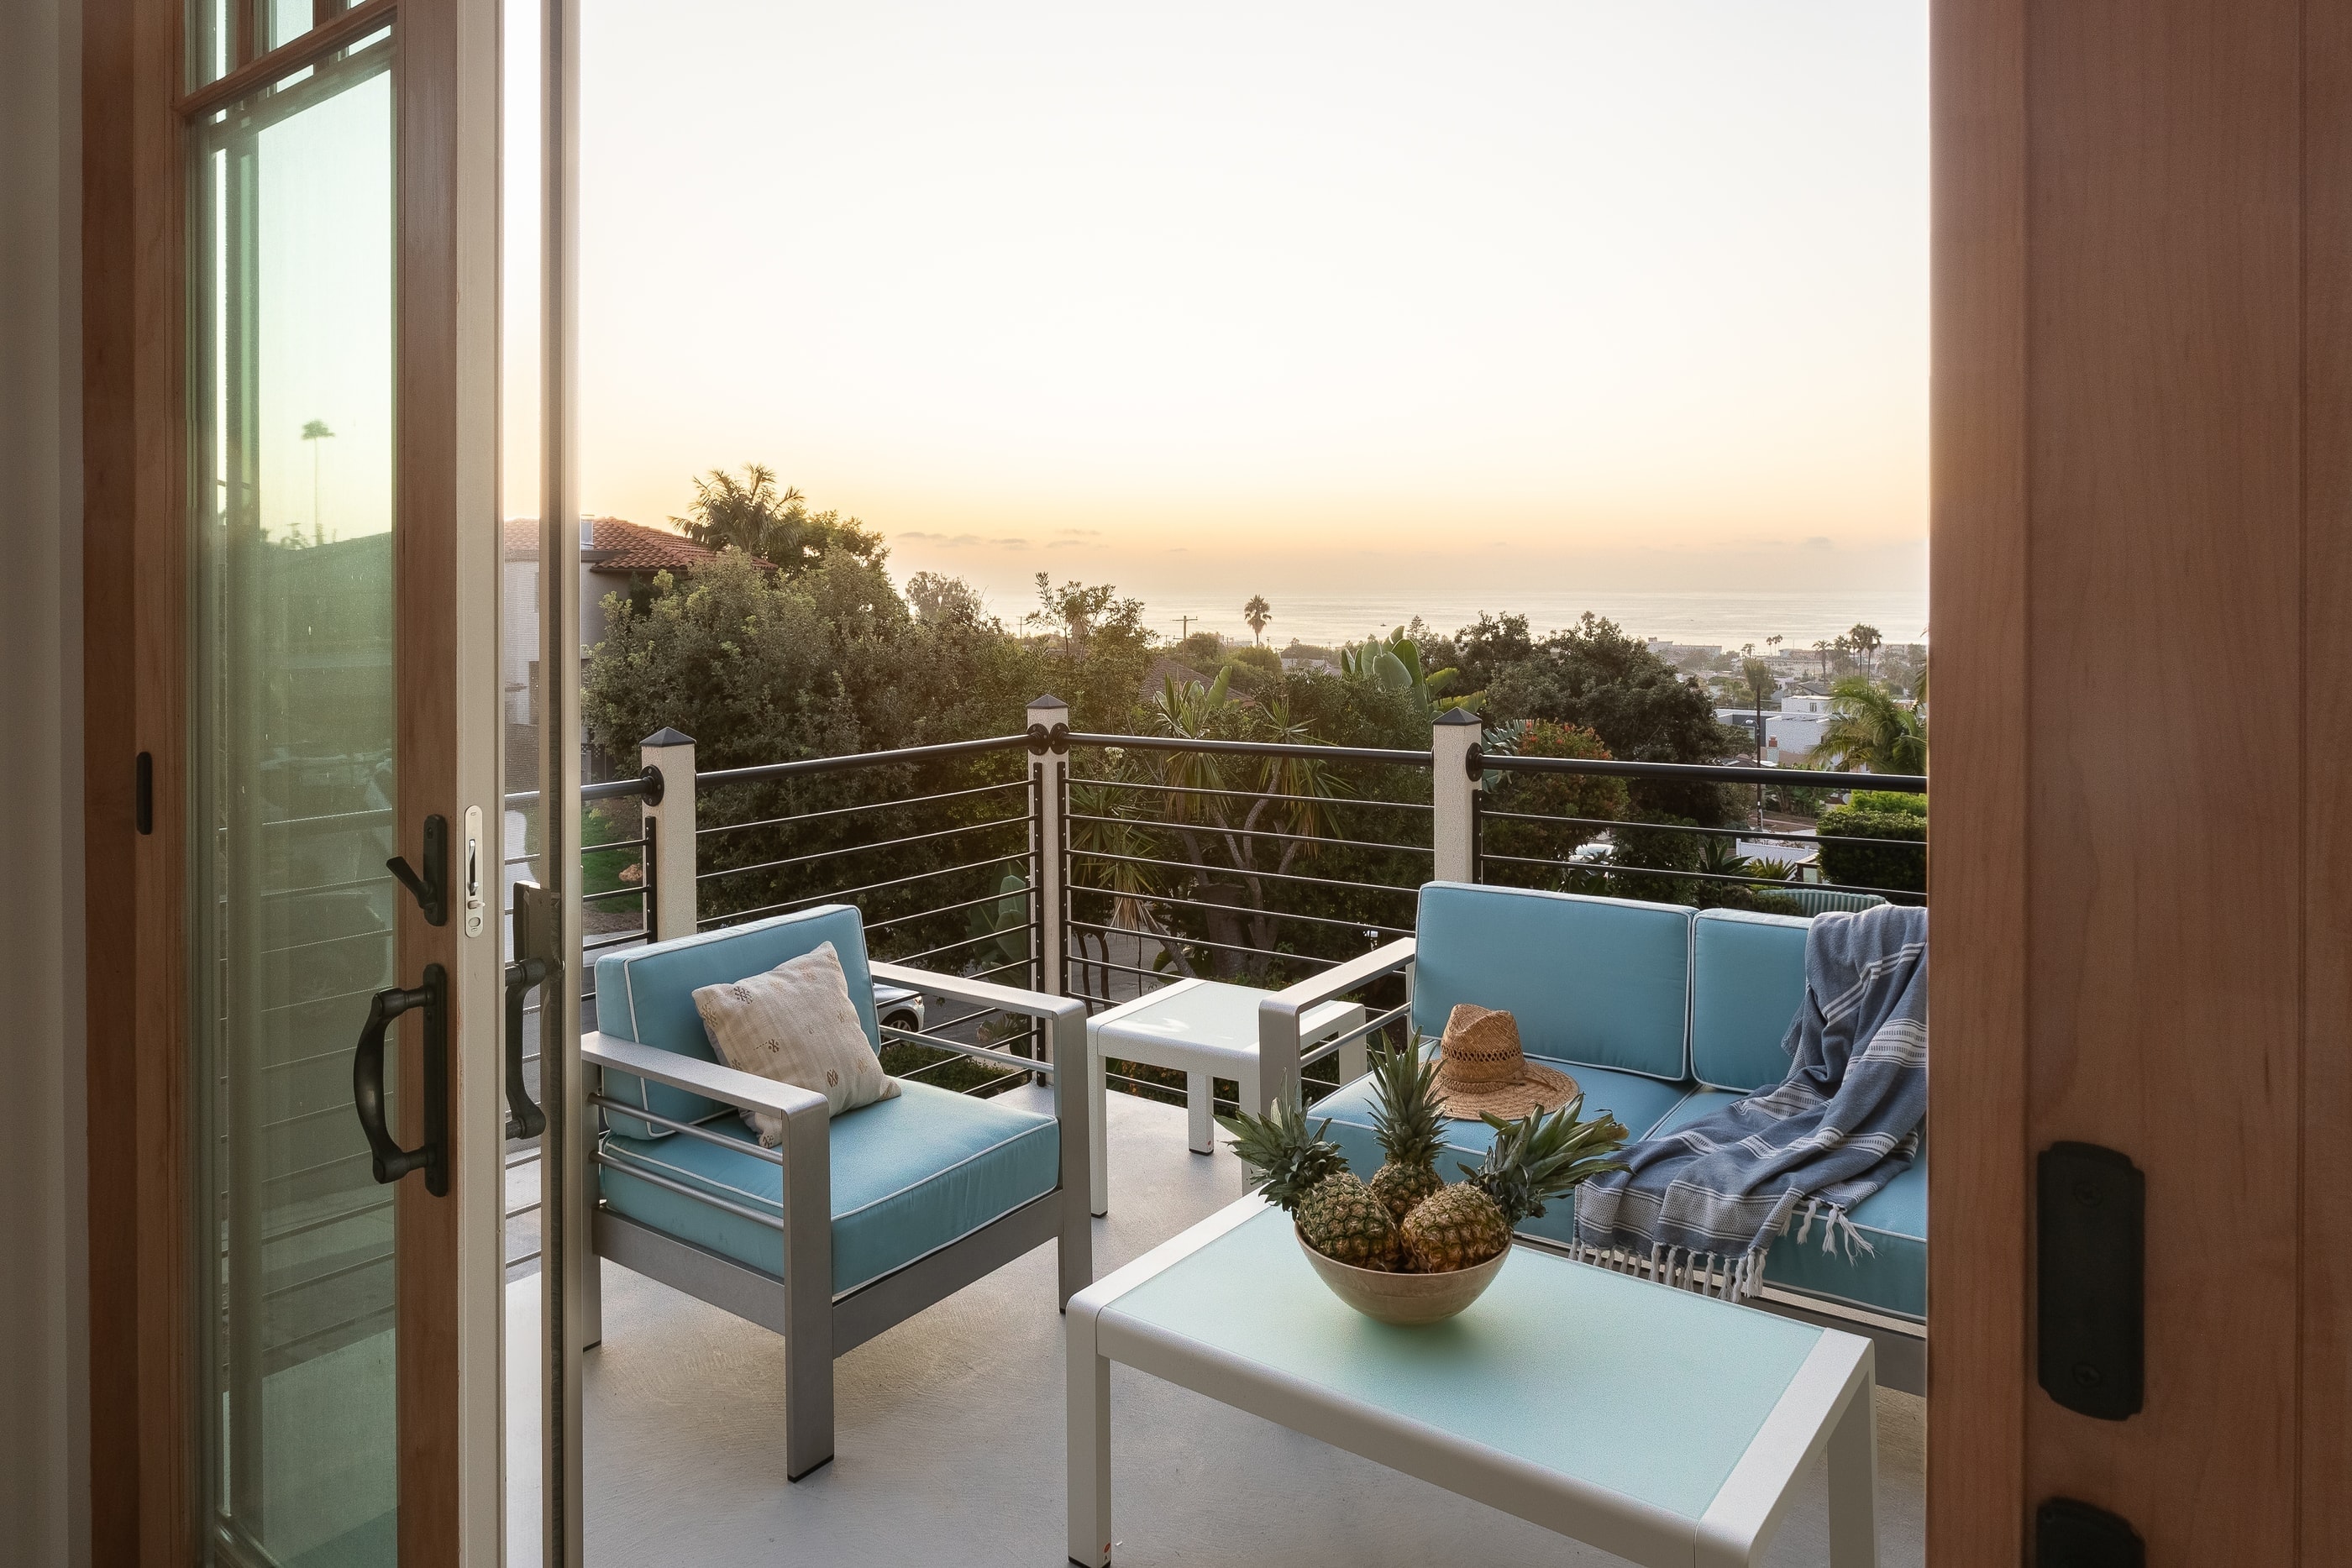 Enjoy the ocean views from the second floor.